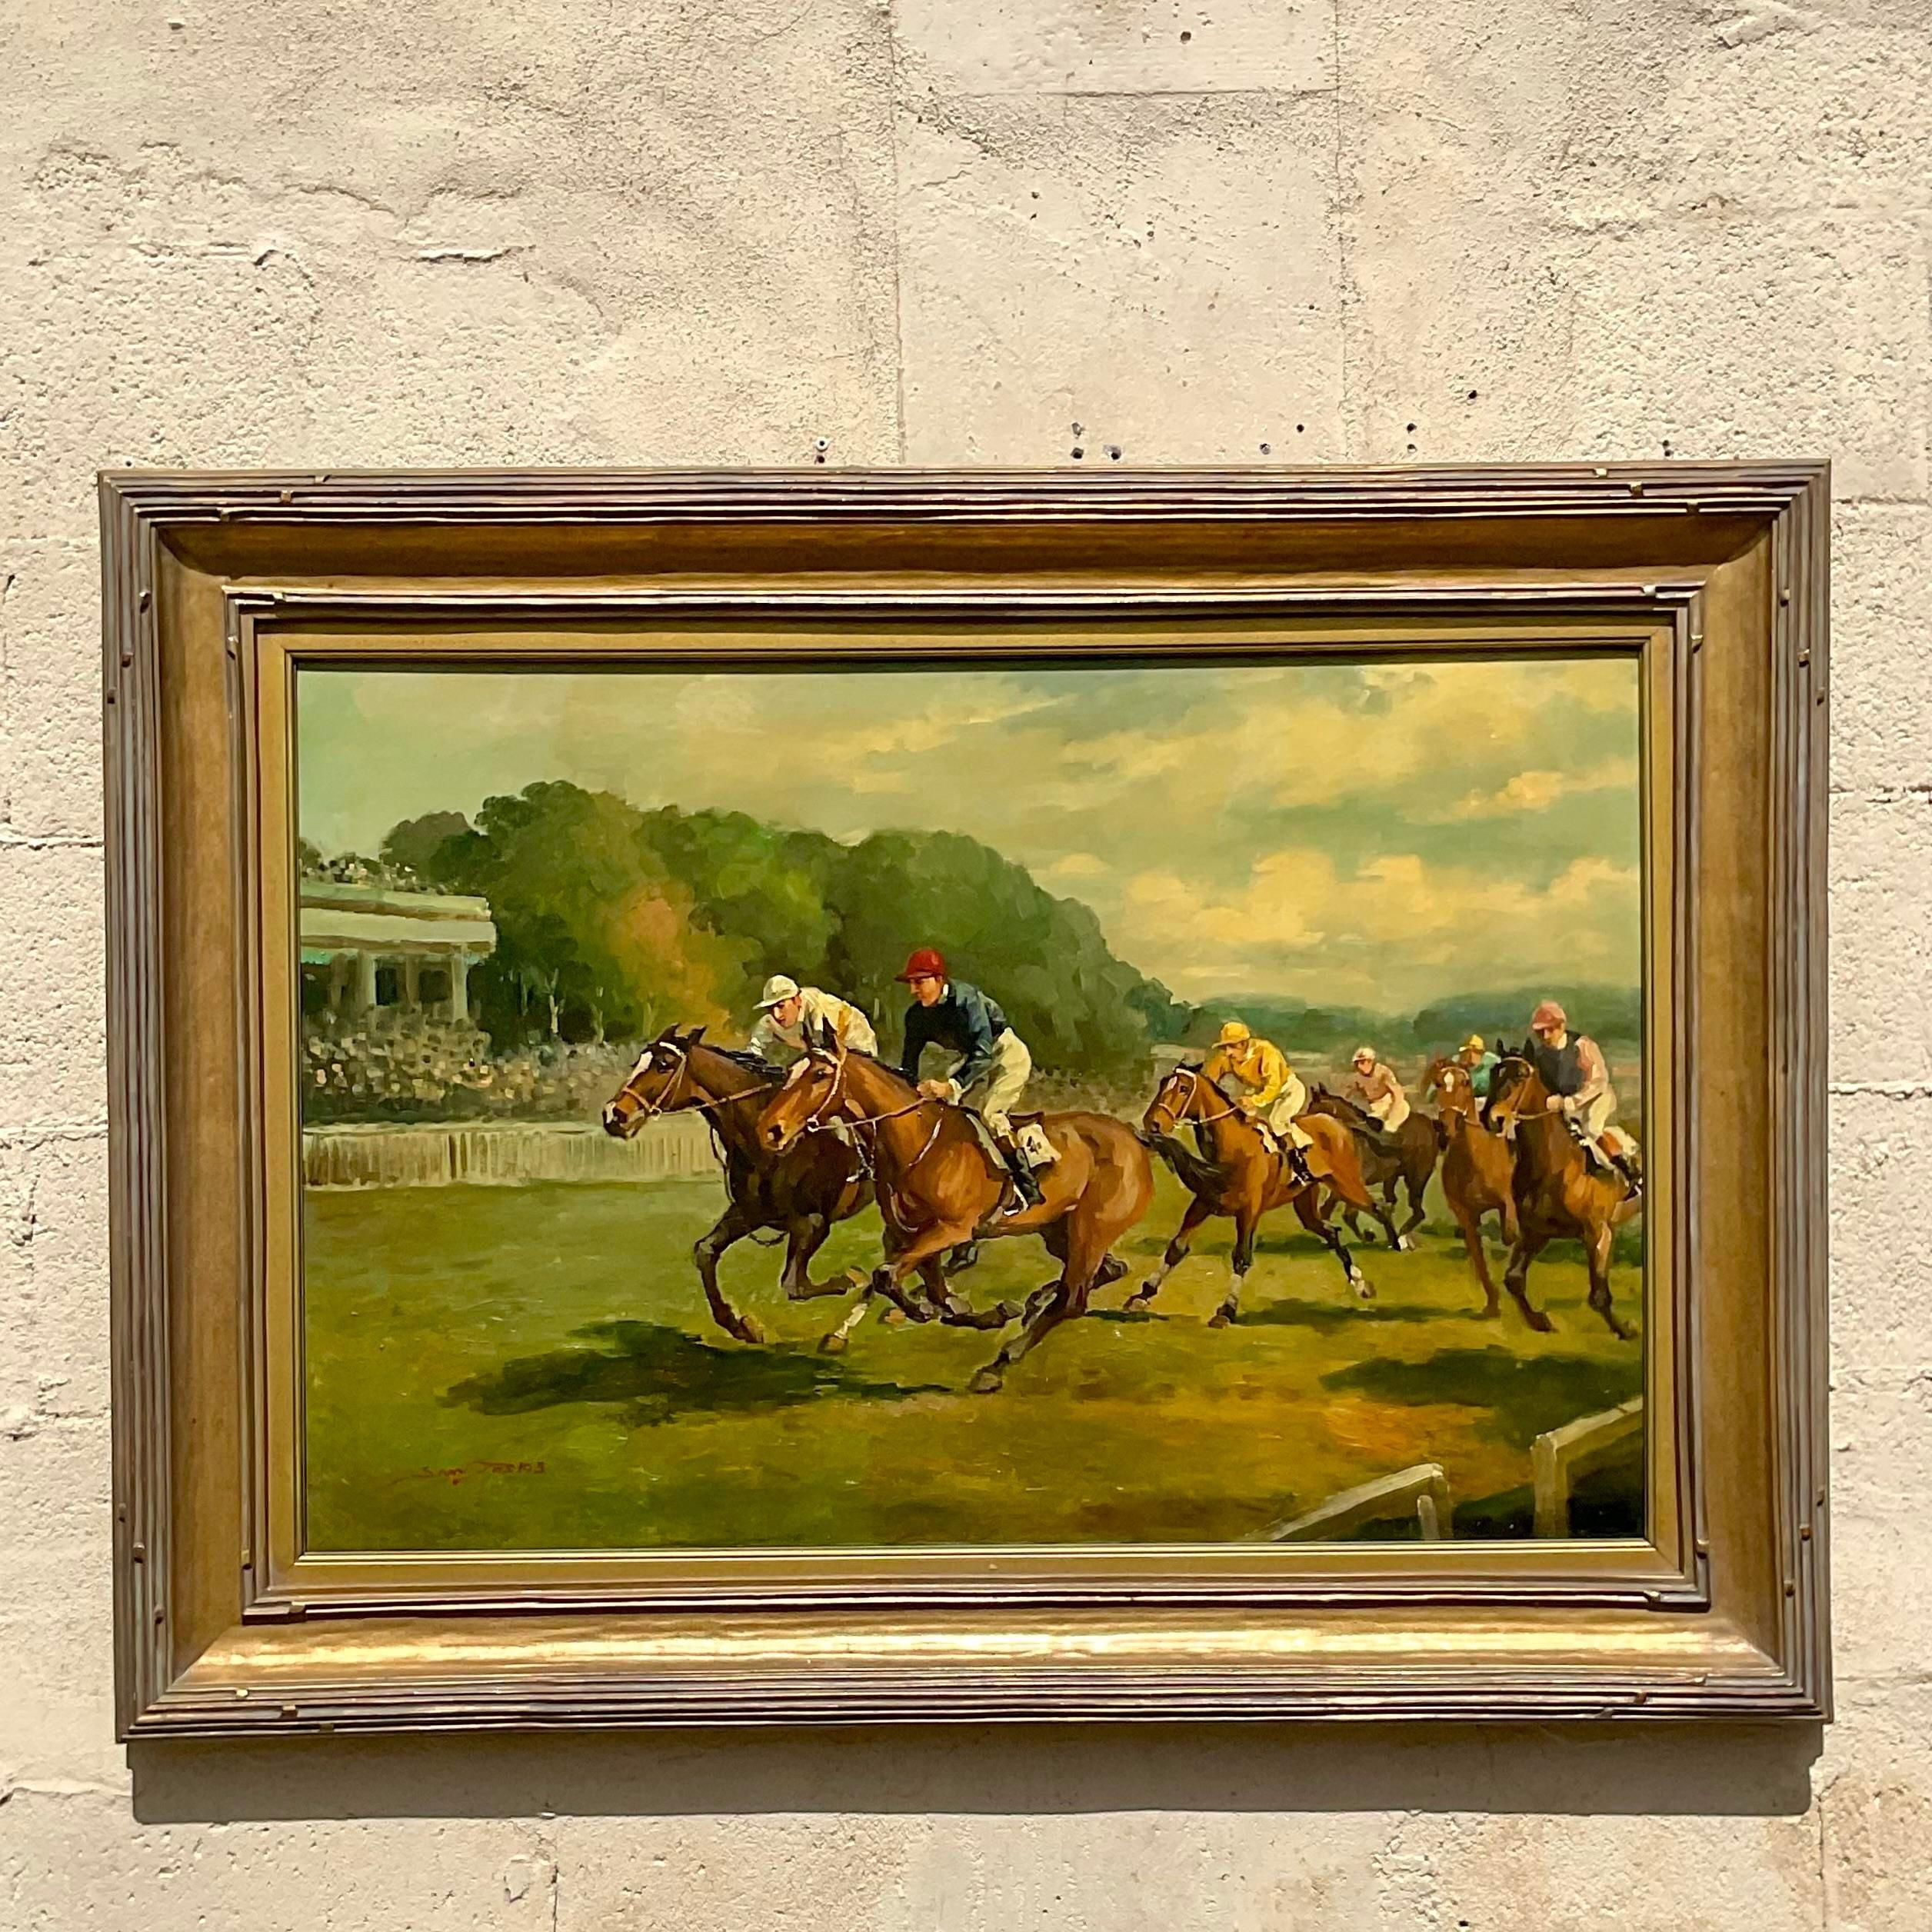 An exceptional vintage Boho original oil painting on canvas. A chic equestrian composition in deep rich colors. Signed by the artist and beautifully framed. Acquired from a Palm Beach estate.